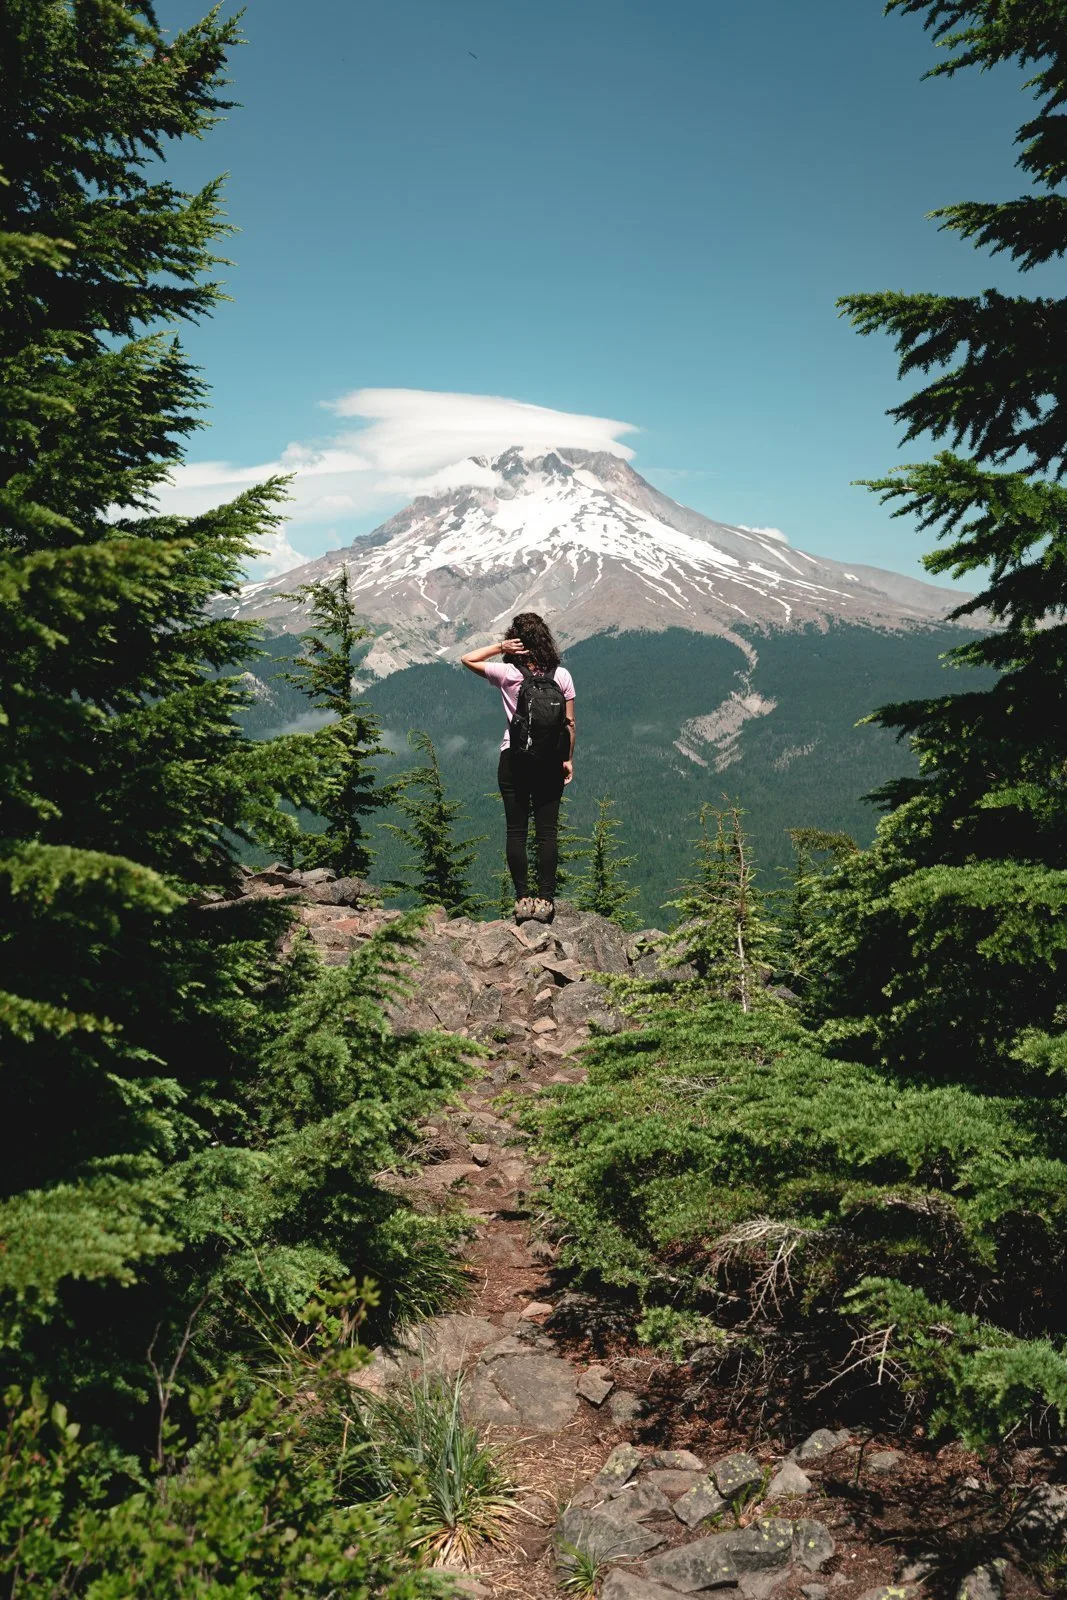 Tom Dick and Harry mountain has one of the best hikes during your Portland adventures.